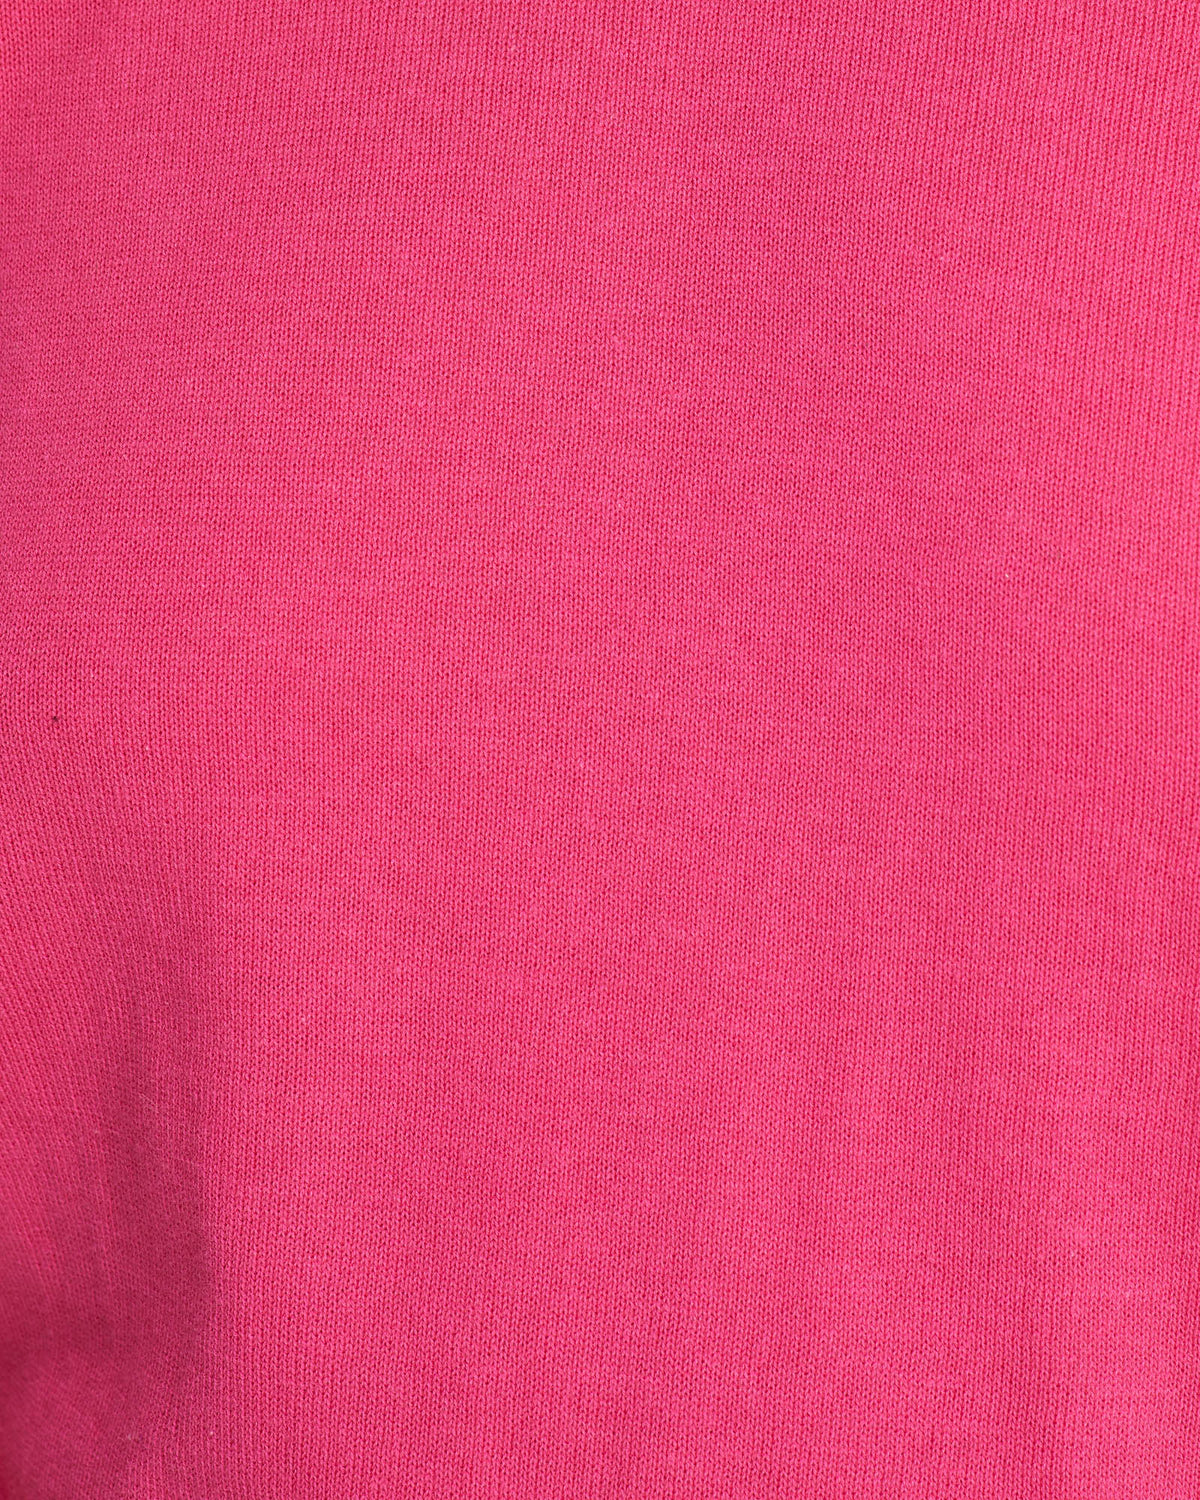 FLORENCE COTTON CREW NECK KNIT PINK